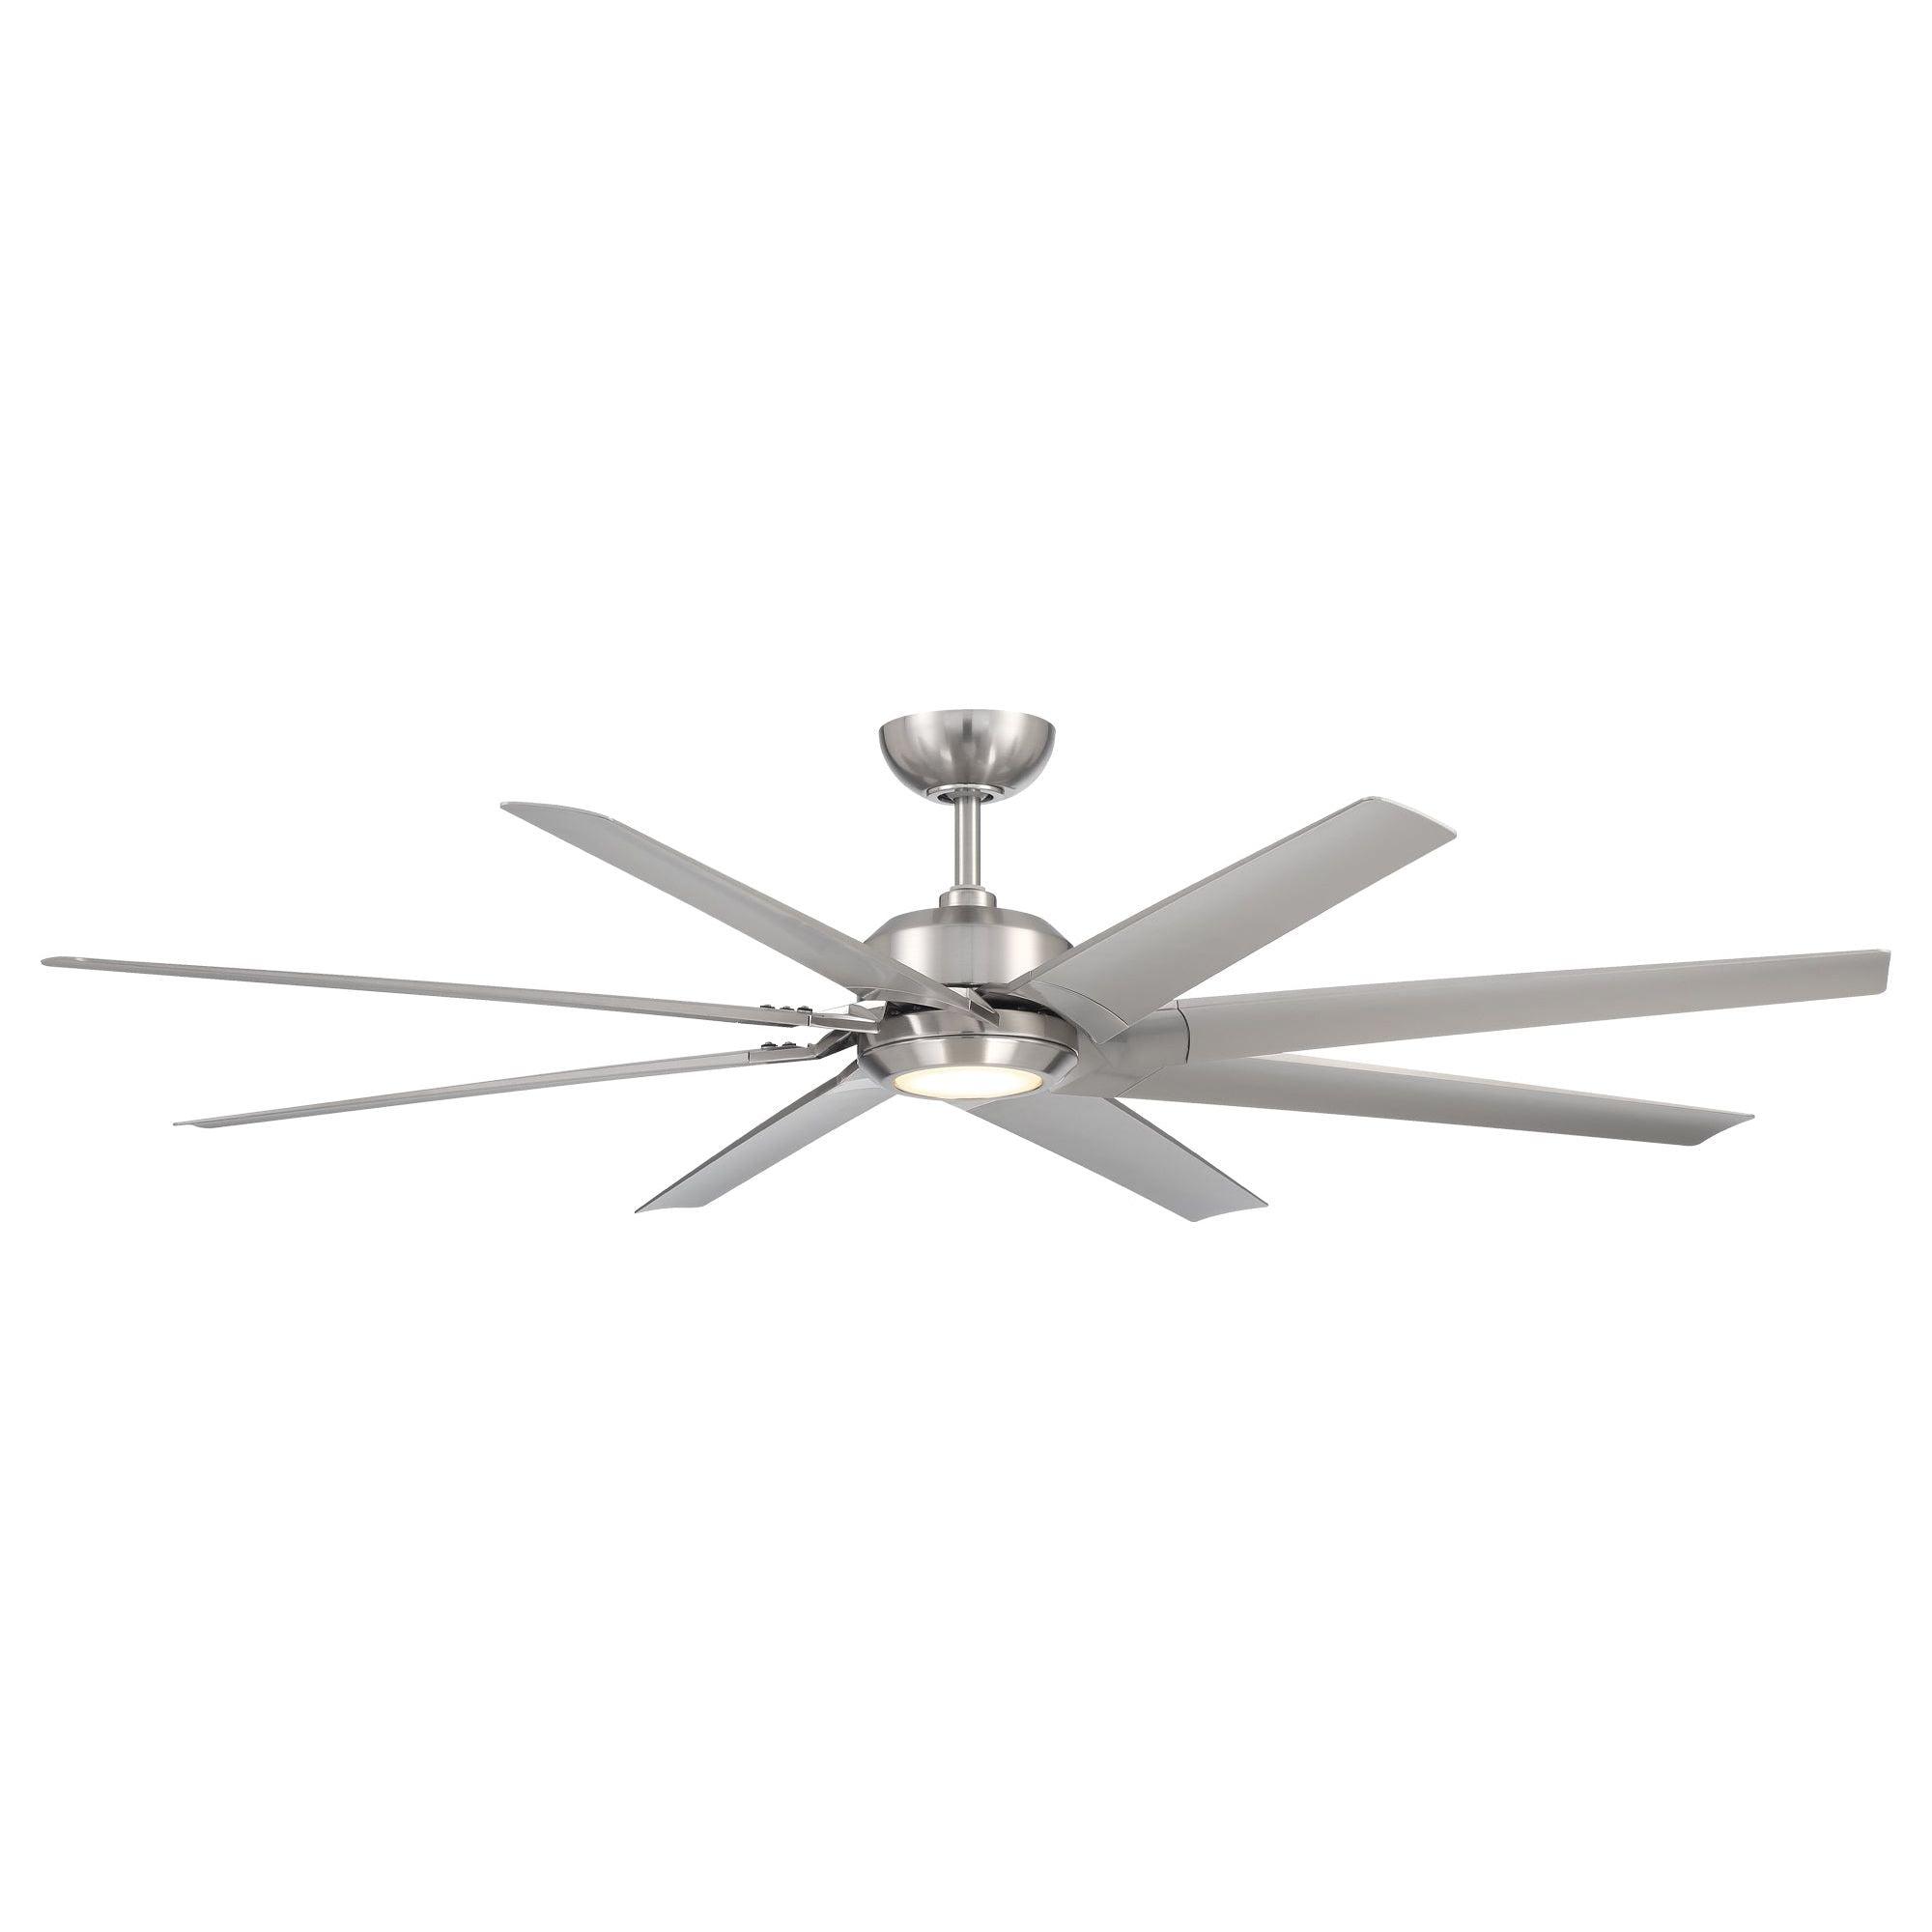 Modern Forms - Roboto XL Indoor/Outdoor 8-Blade 70" Smart Ceiling Fan with LED Light Kit and Remote Control - Lights Canada